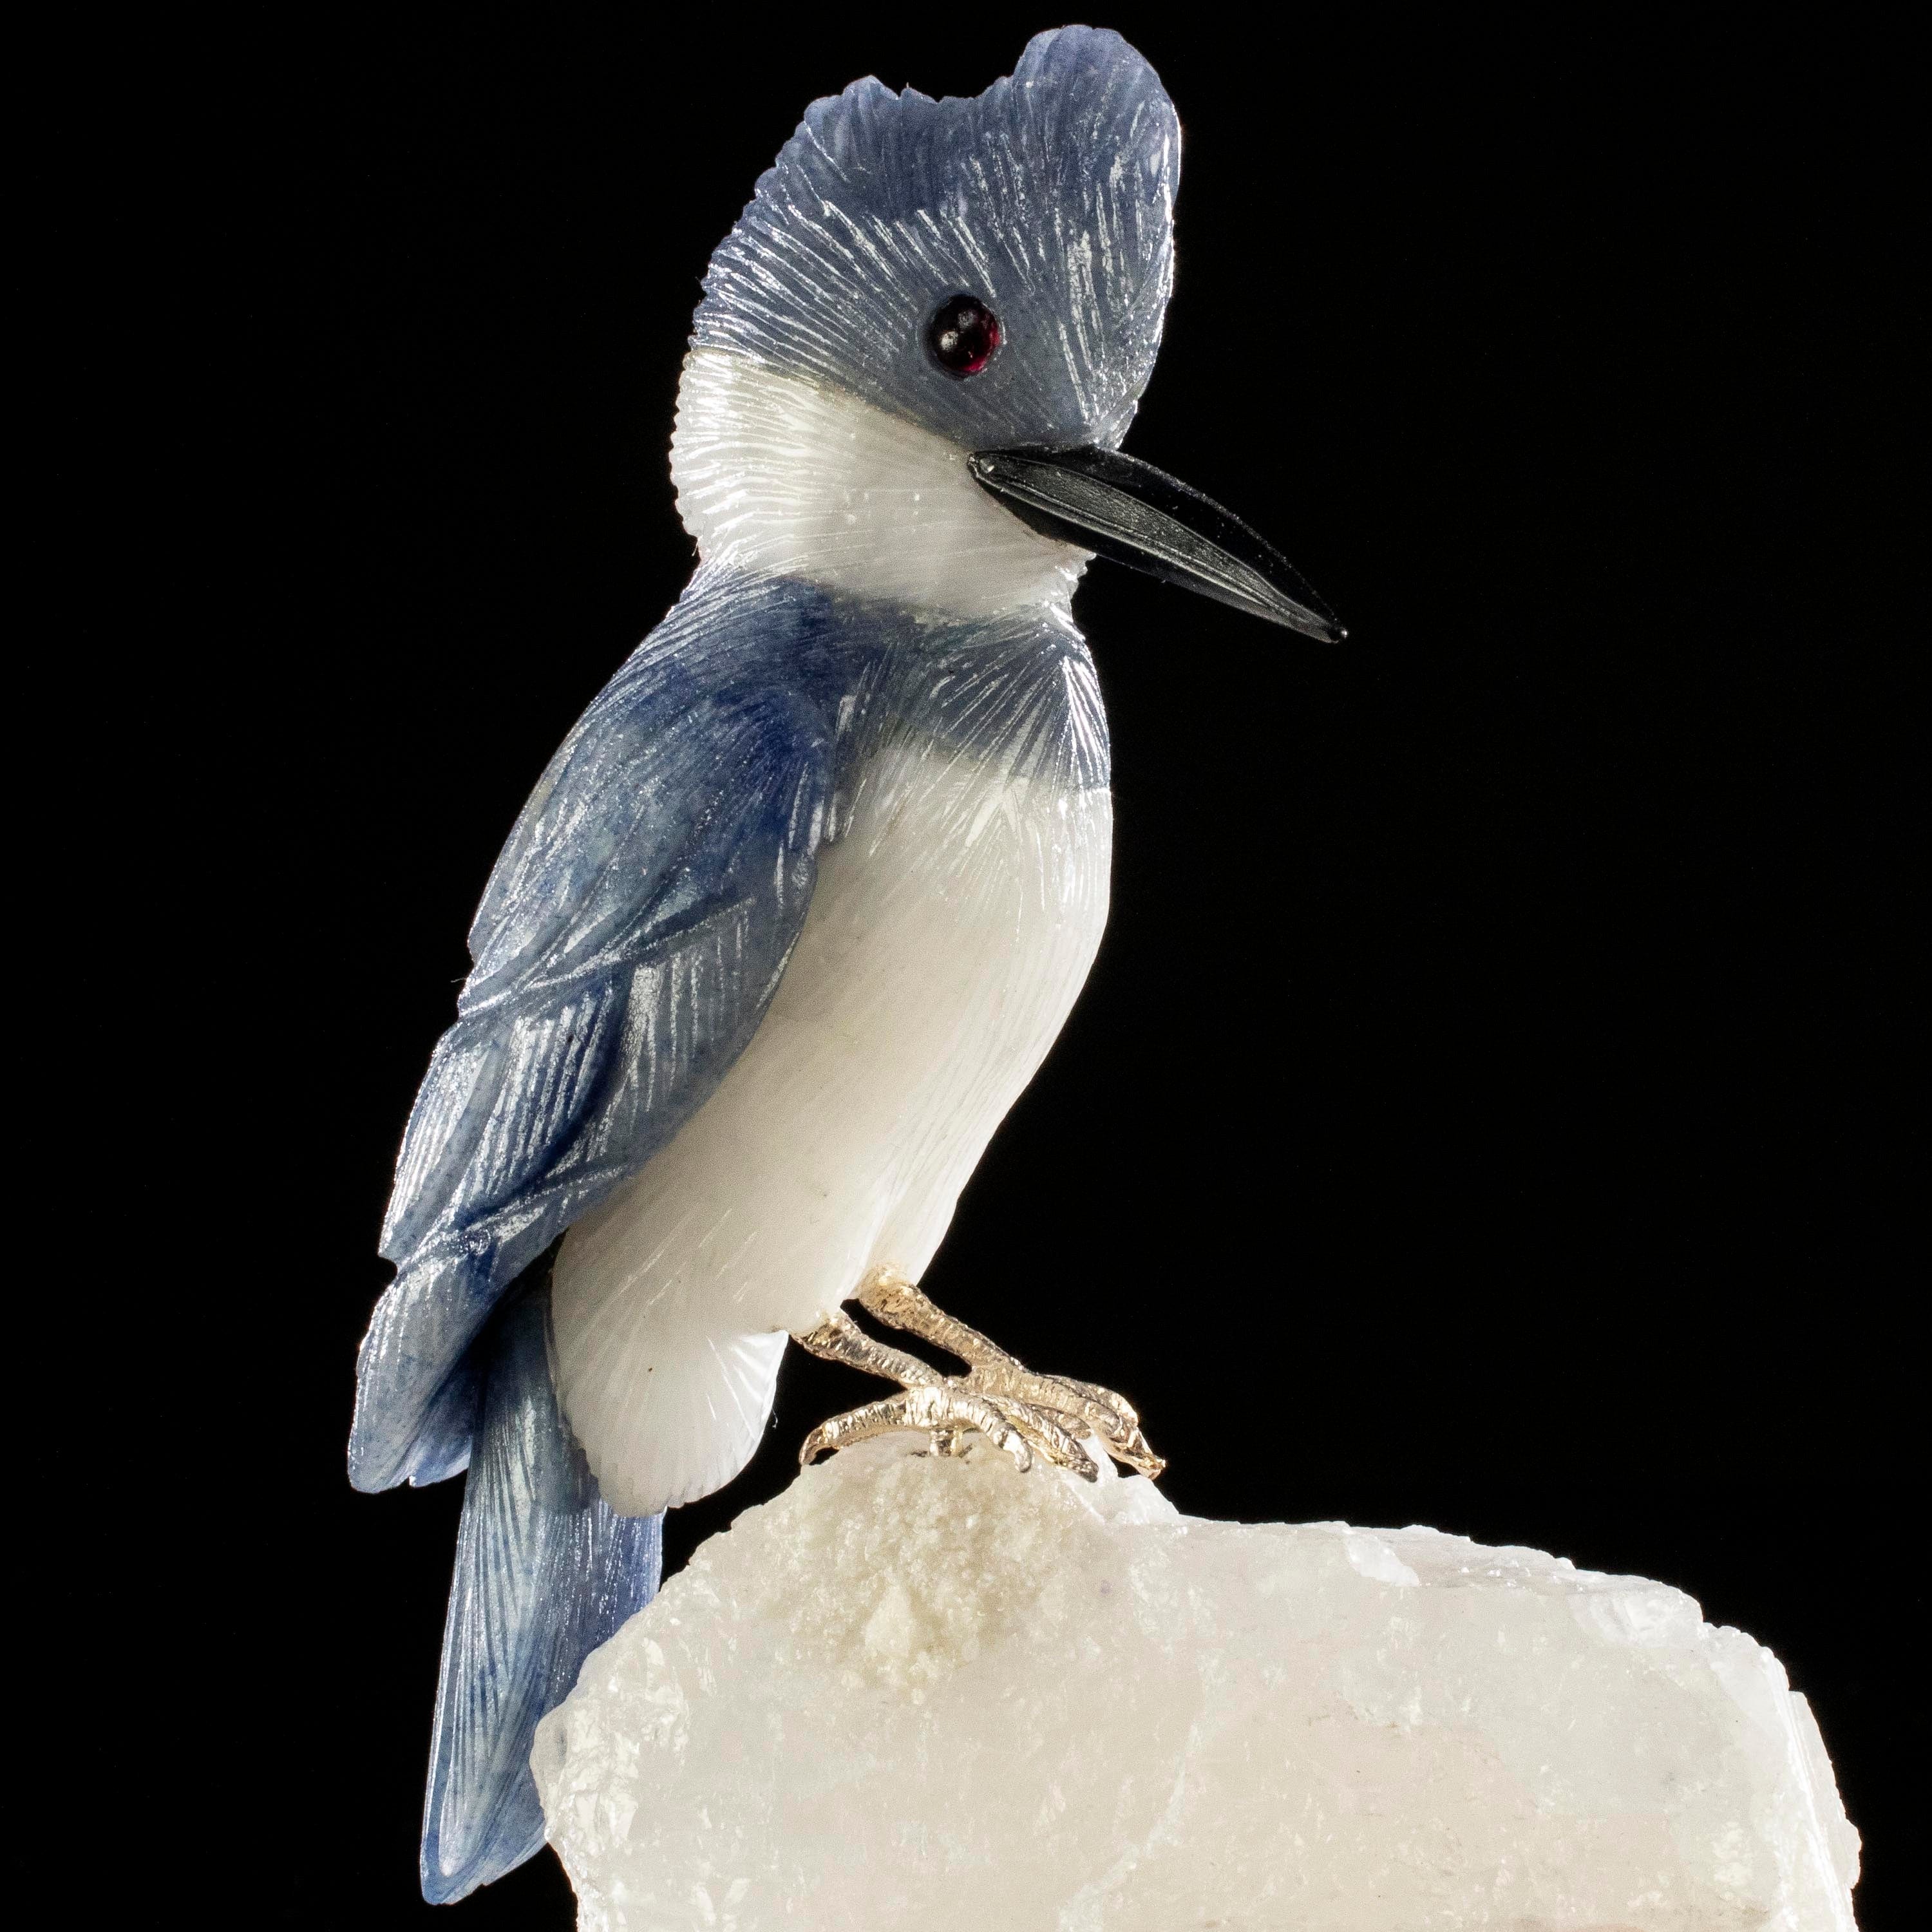 Kalifano Love Birds Carvings Dumortuorite Belted Kingfisher Love Birds Carving on Watermelon Tourmaline Base LB.A112.006